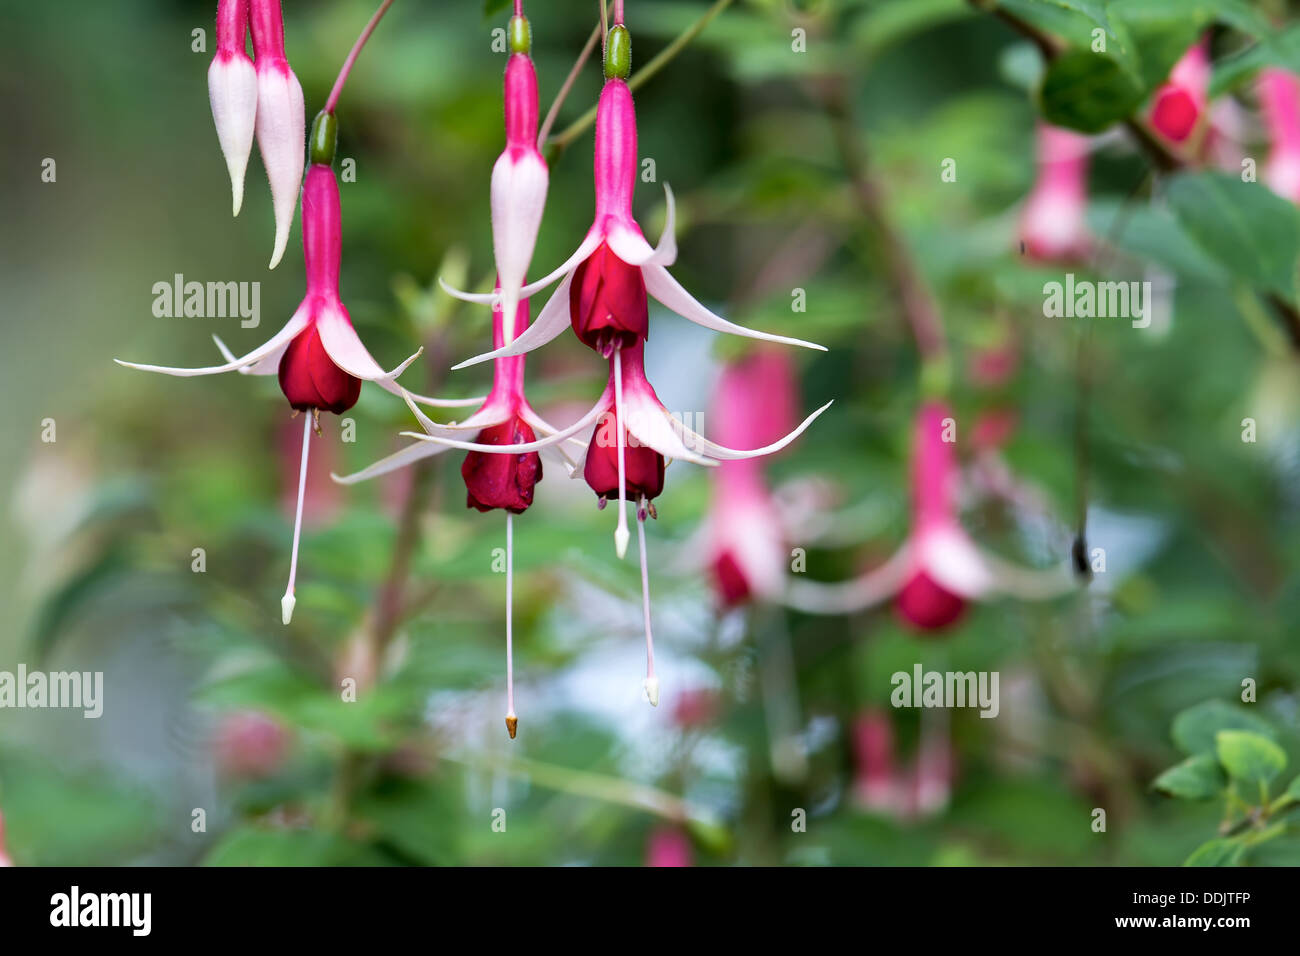 Pink Fuchsia Flowers Blooming on Shrub on Blurred Background Closeup Stock Photo